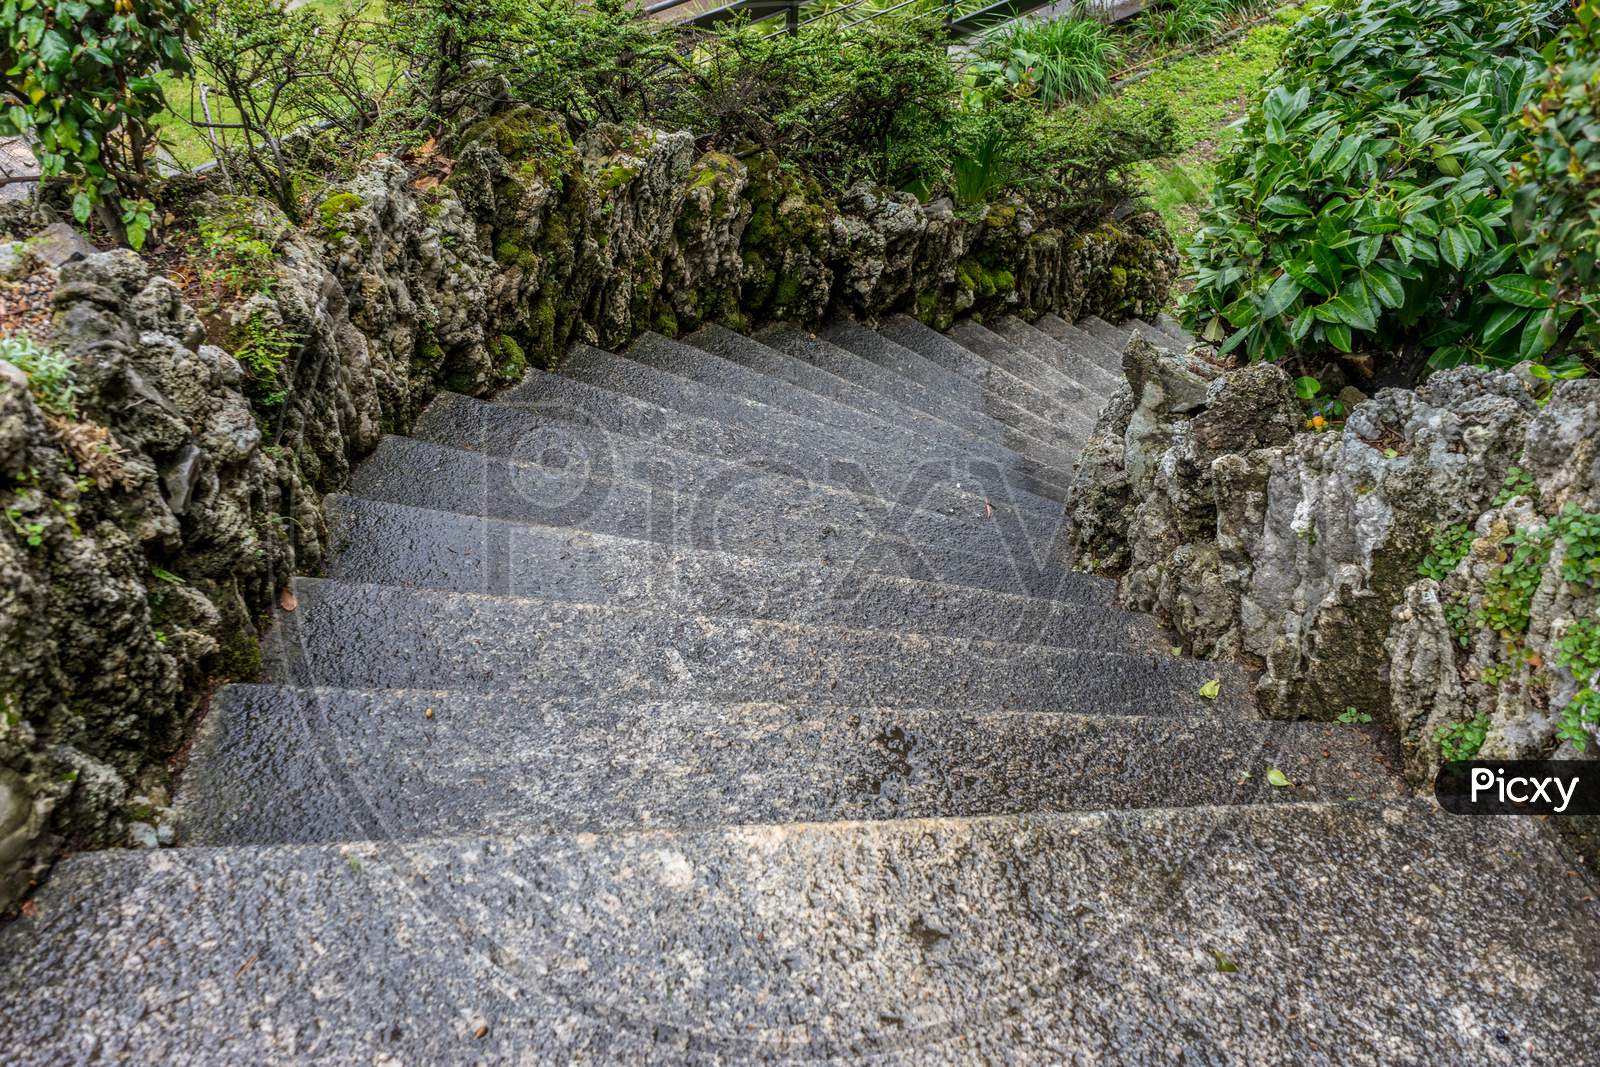 Italy, Varenna, Lake Como, Footpath By Stone Wall In Garden